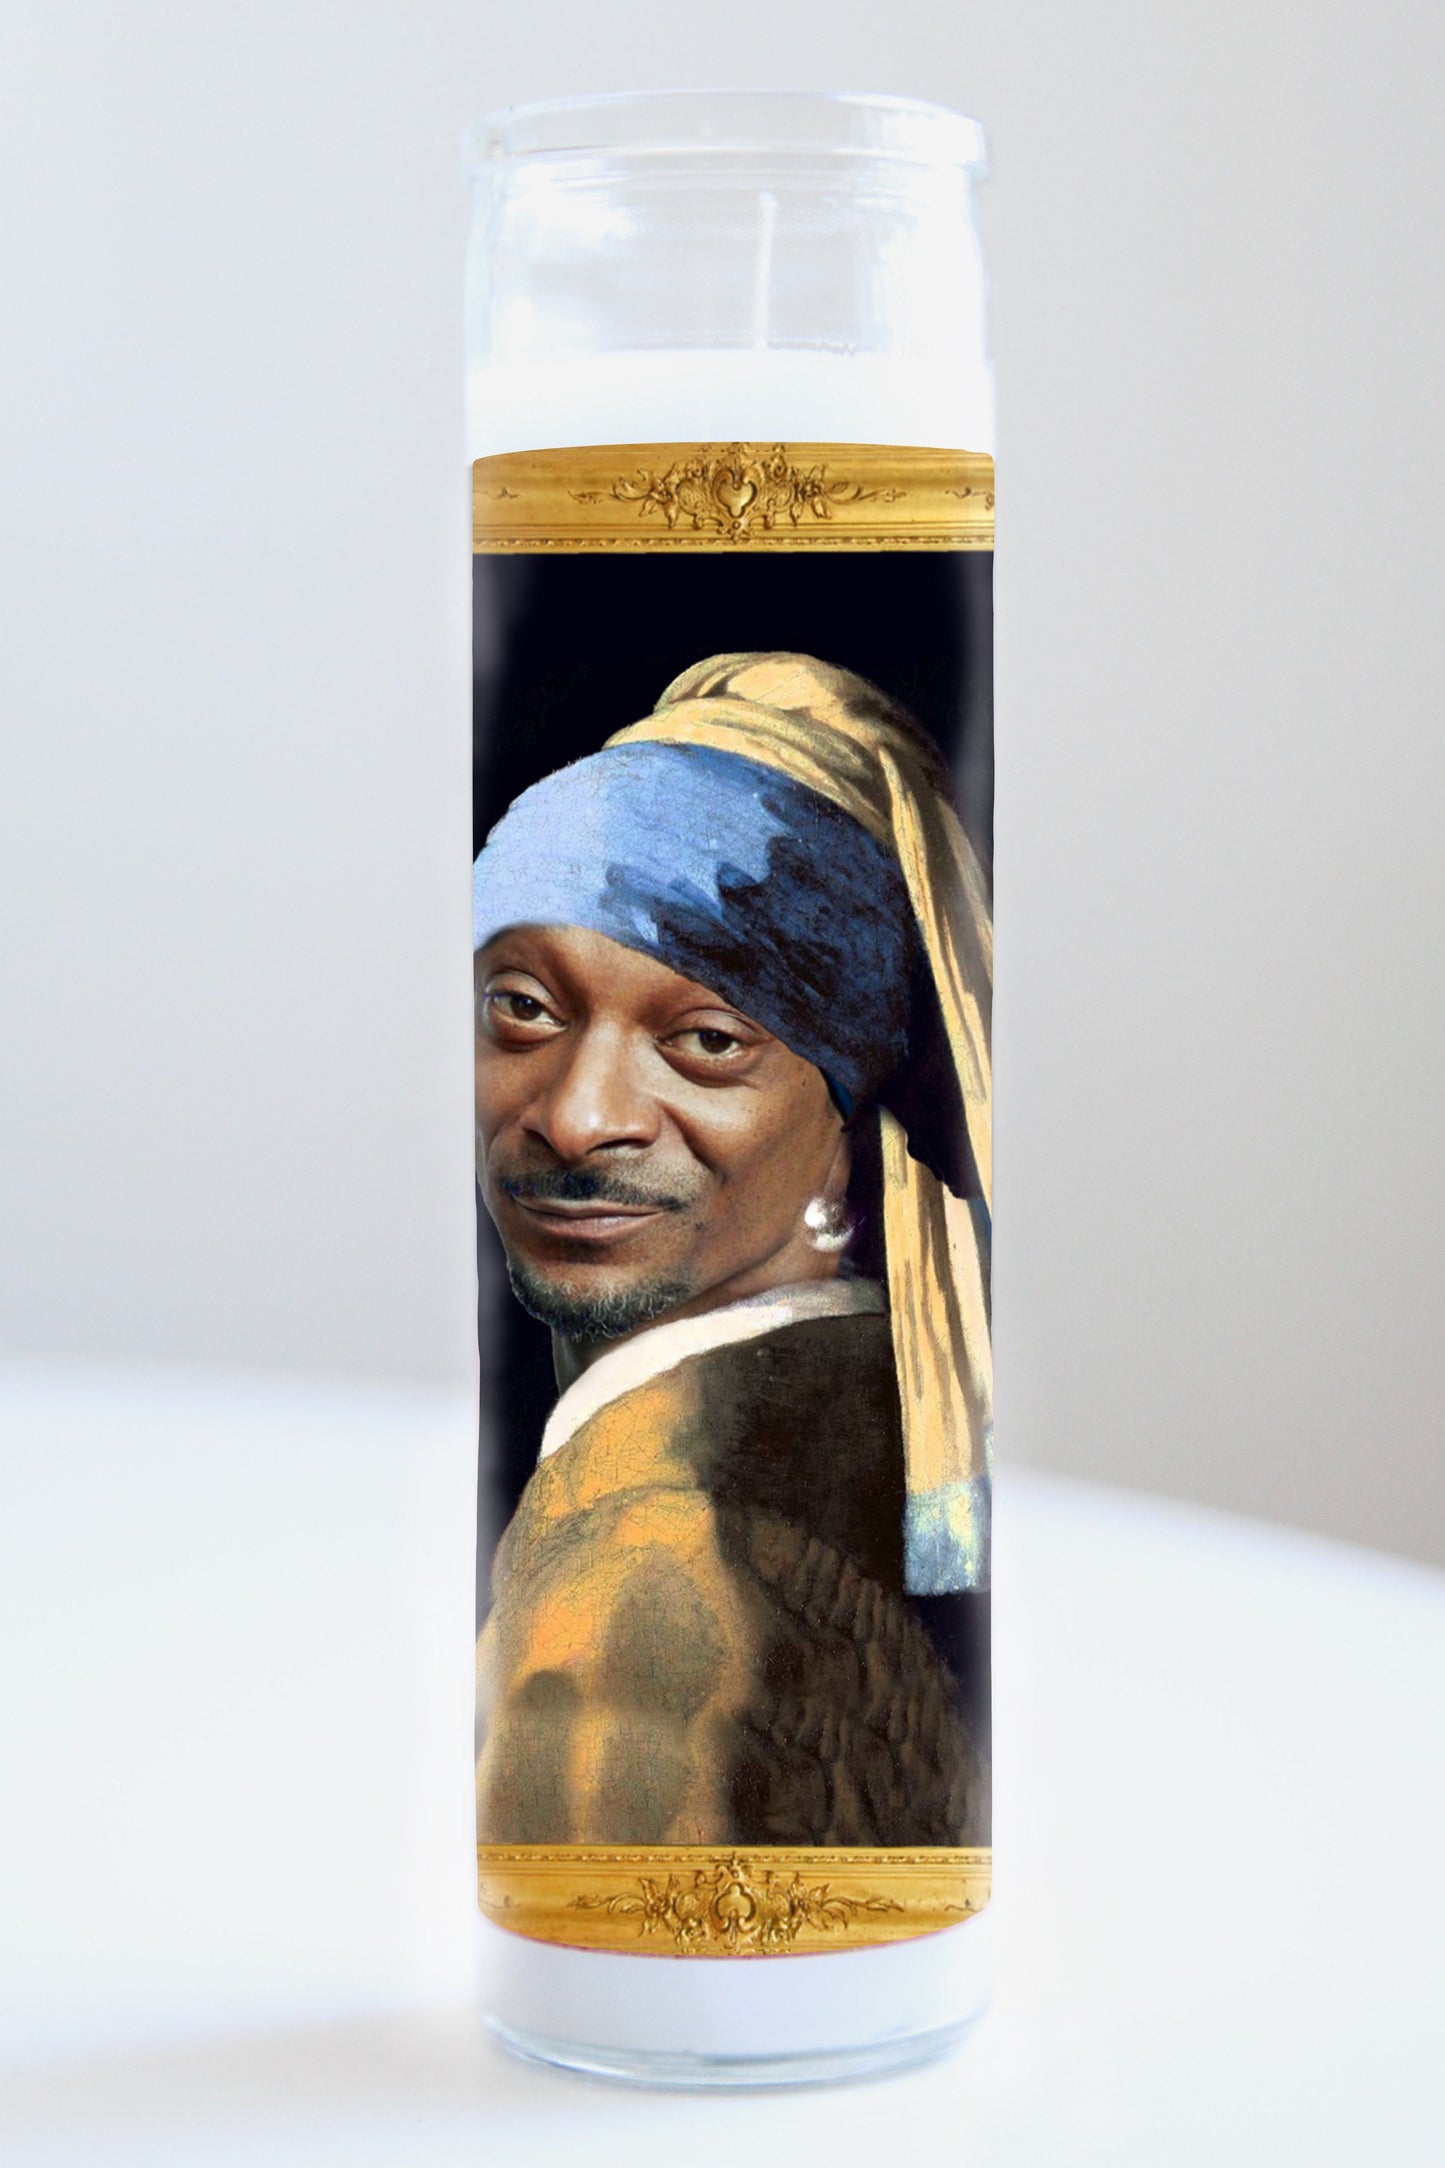 Snoop Dogg "Snoop with a Hoop" Candle